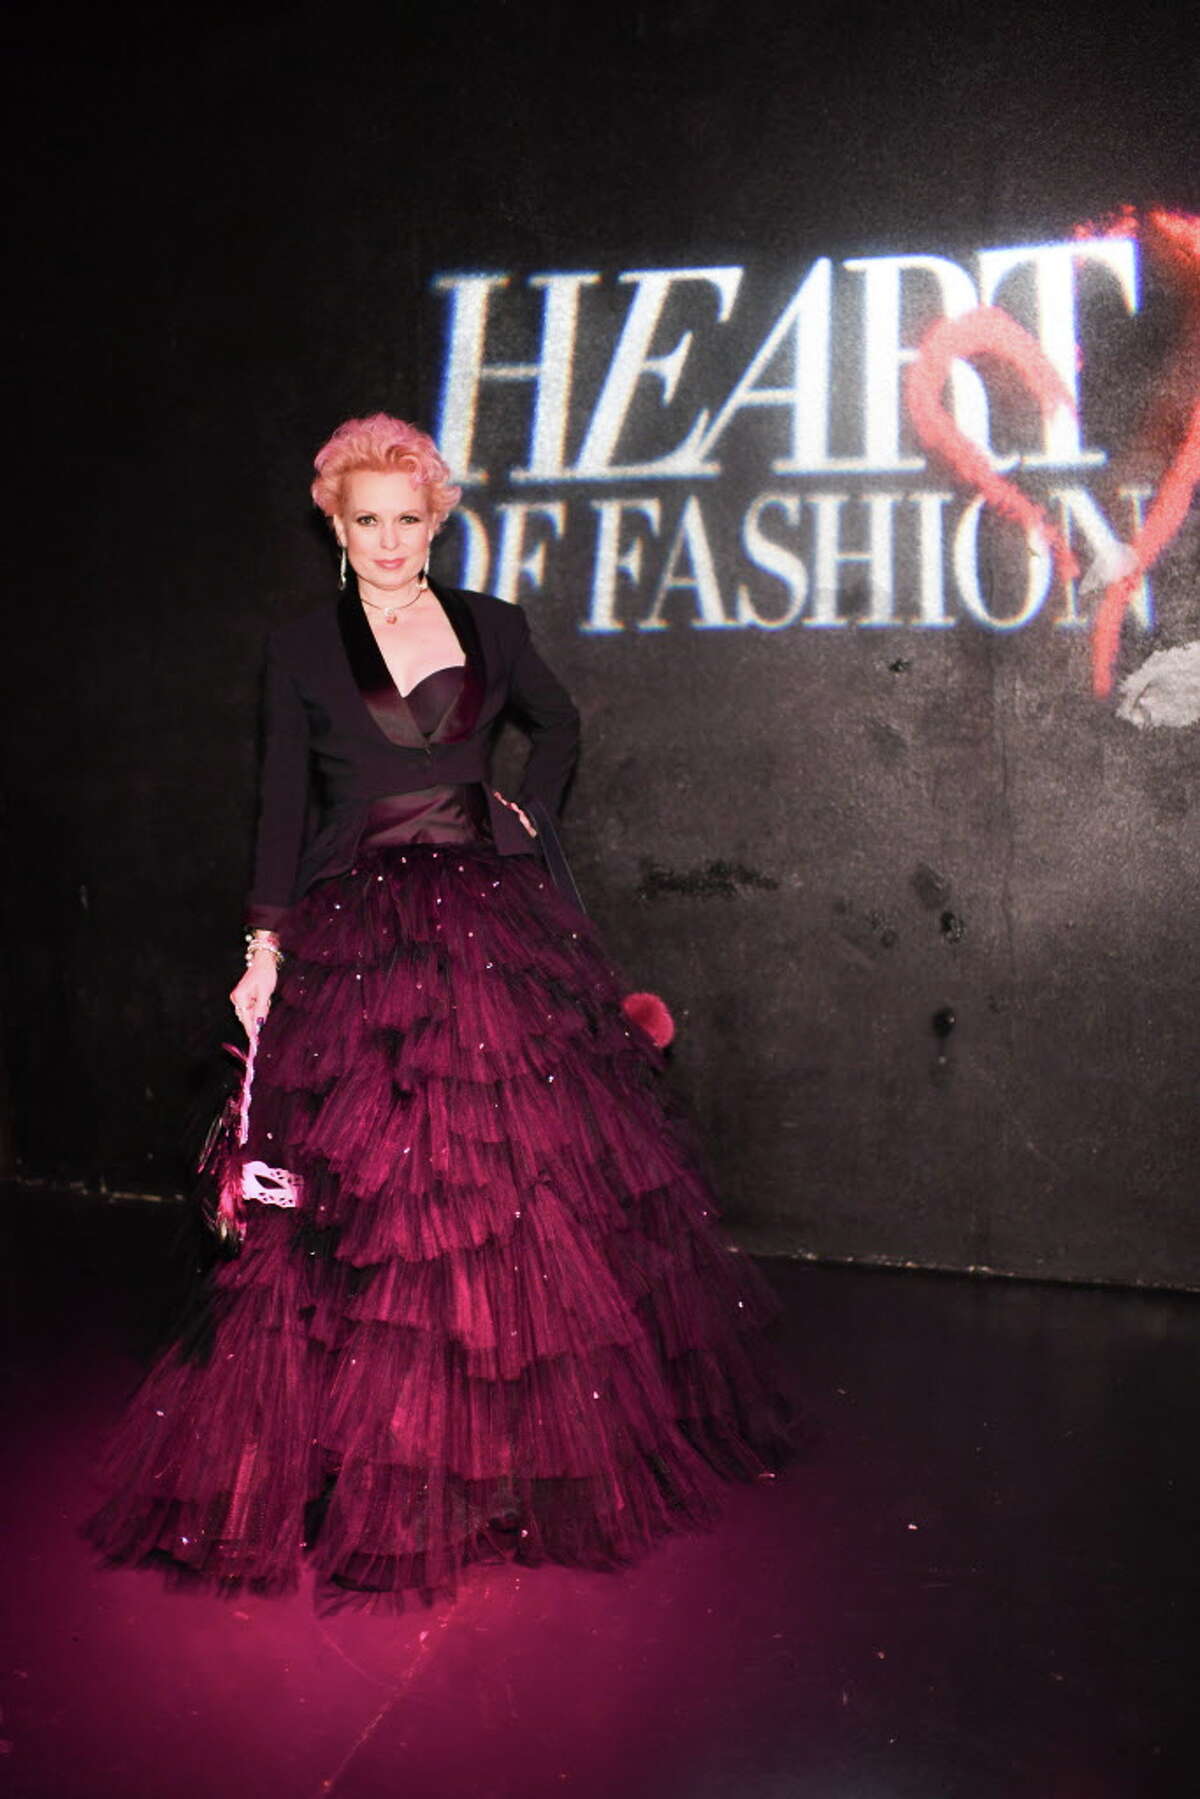 Heart of Fashion celebrated Back to Black at Rich's